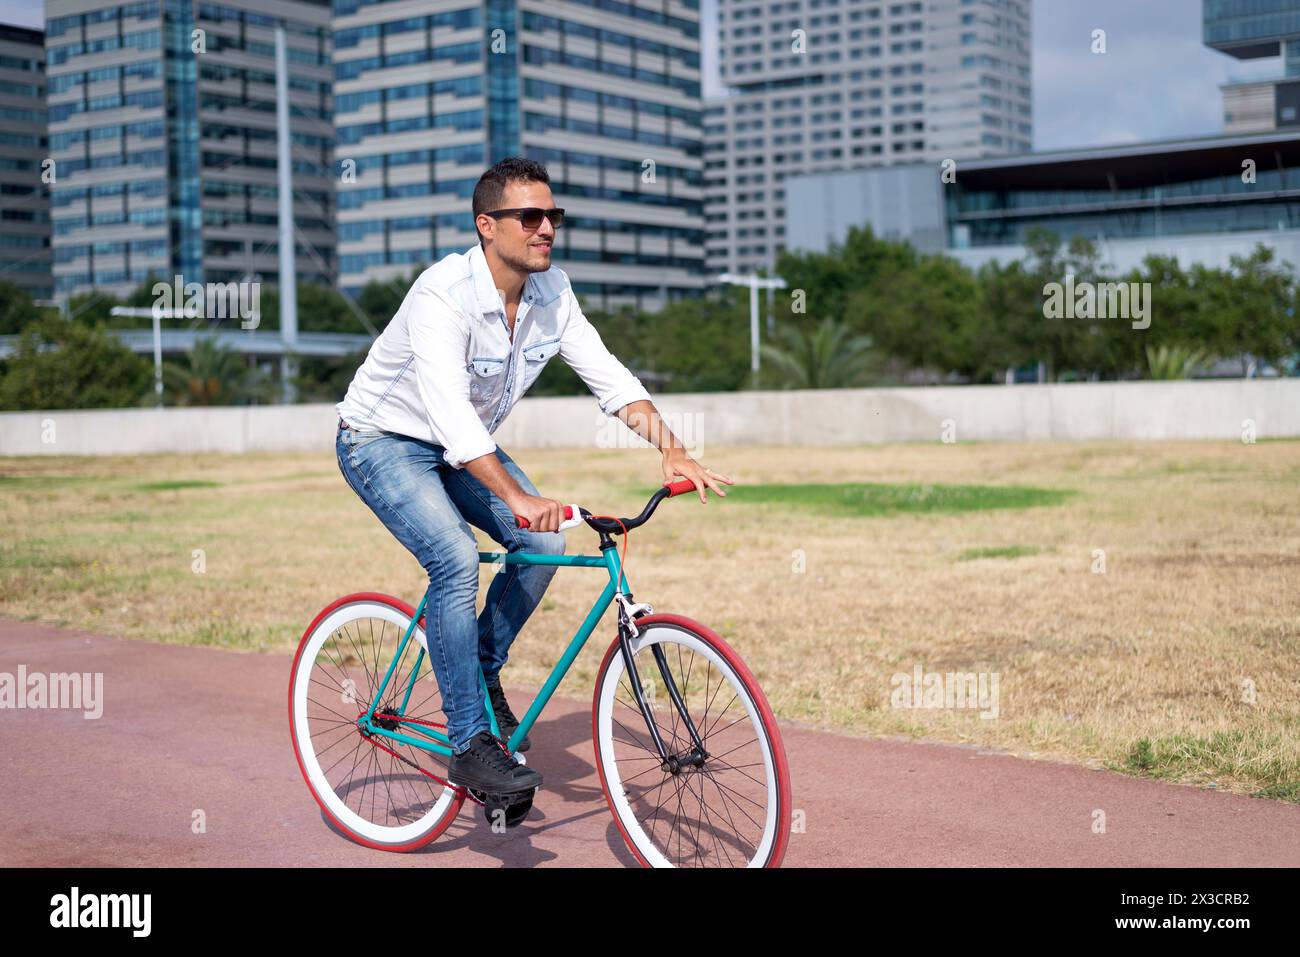 Fashionable young man riding a fixie bike in a city park, with modern buildings in the background, exemplifying eco-friendly commuting Stock Photo